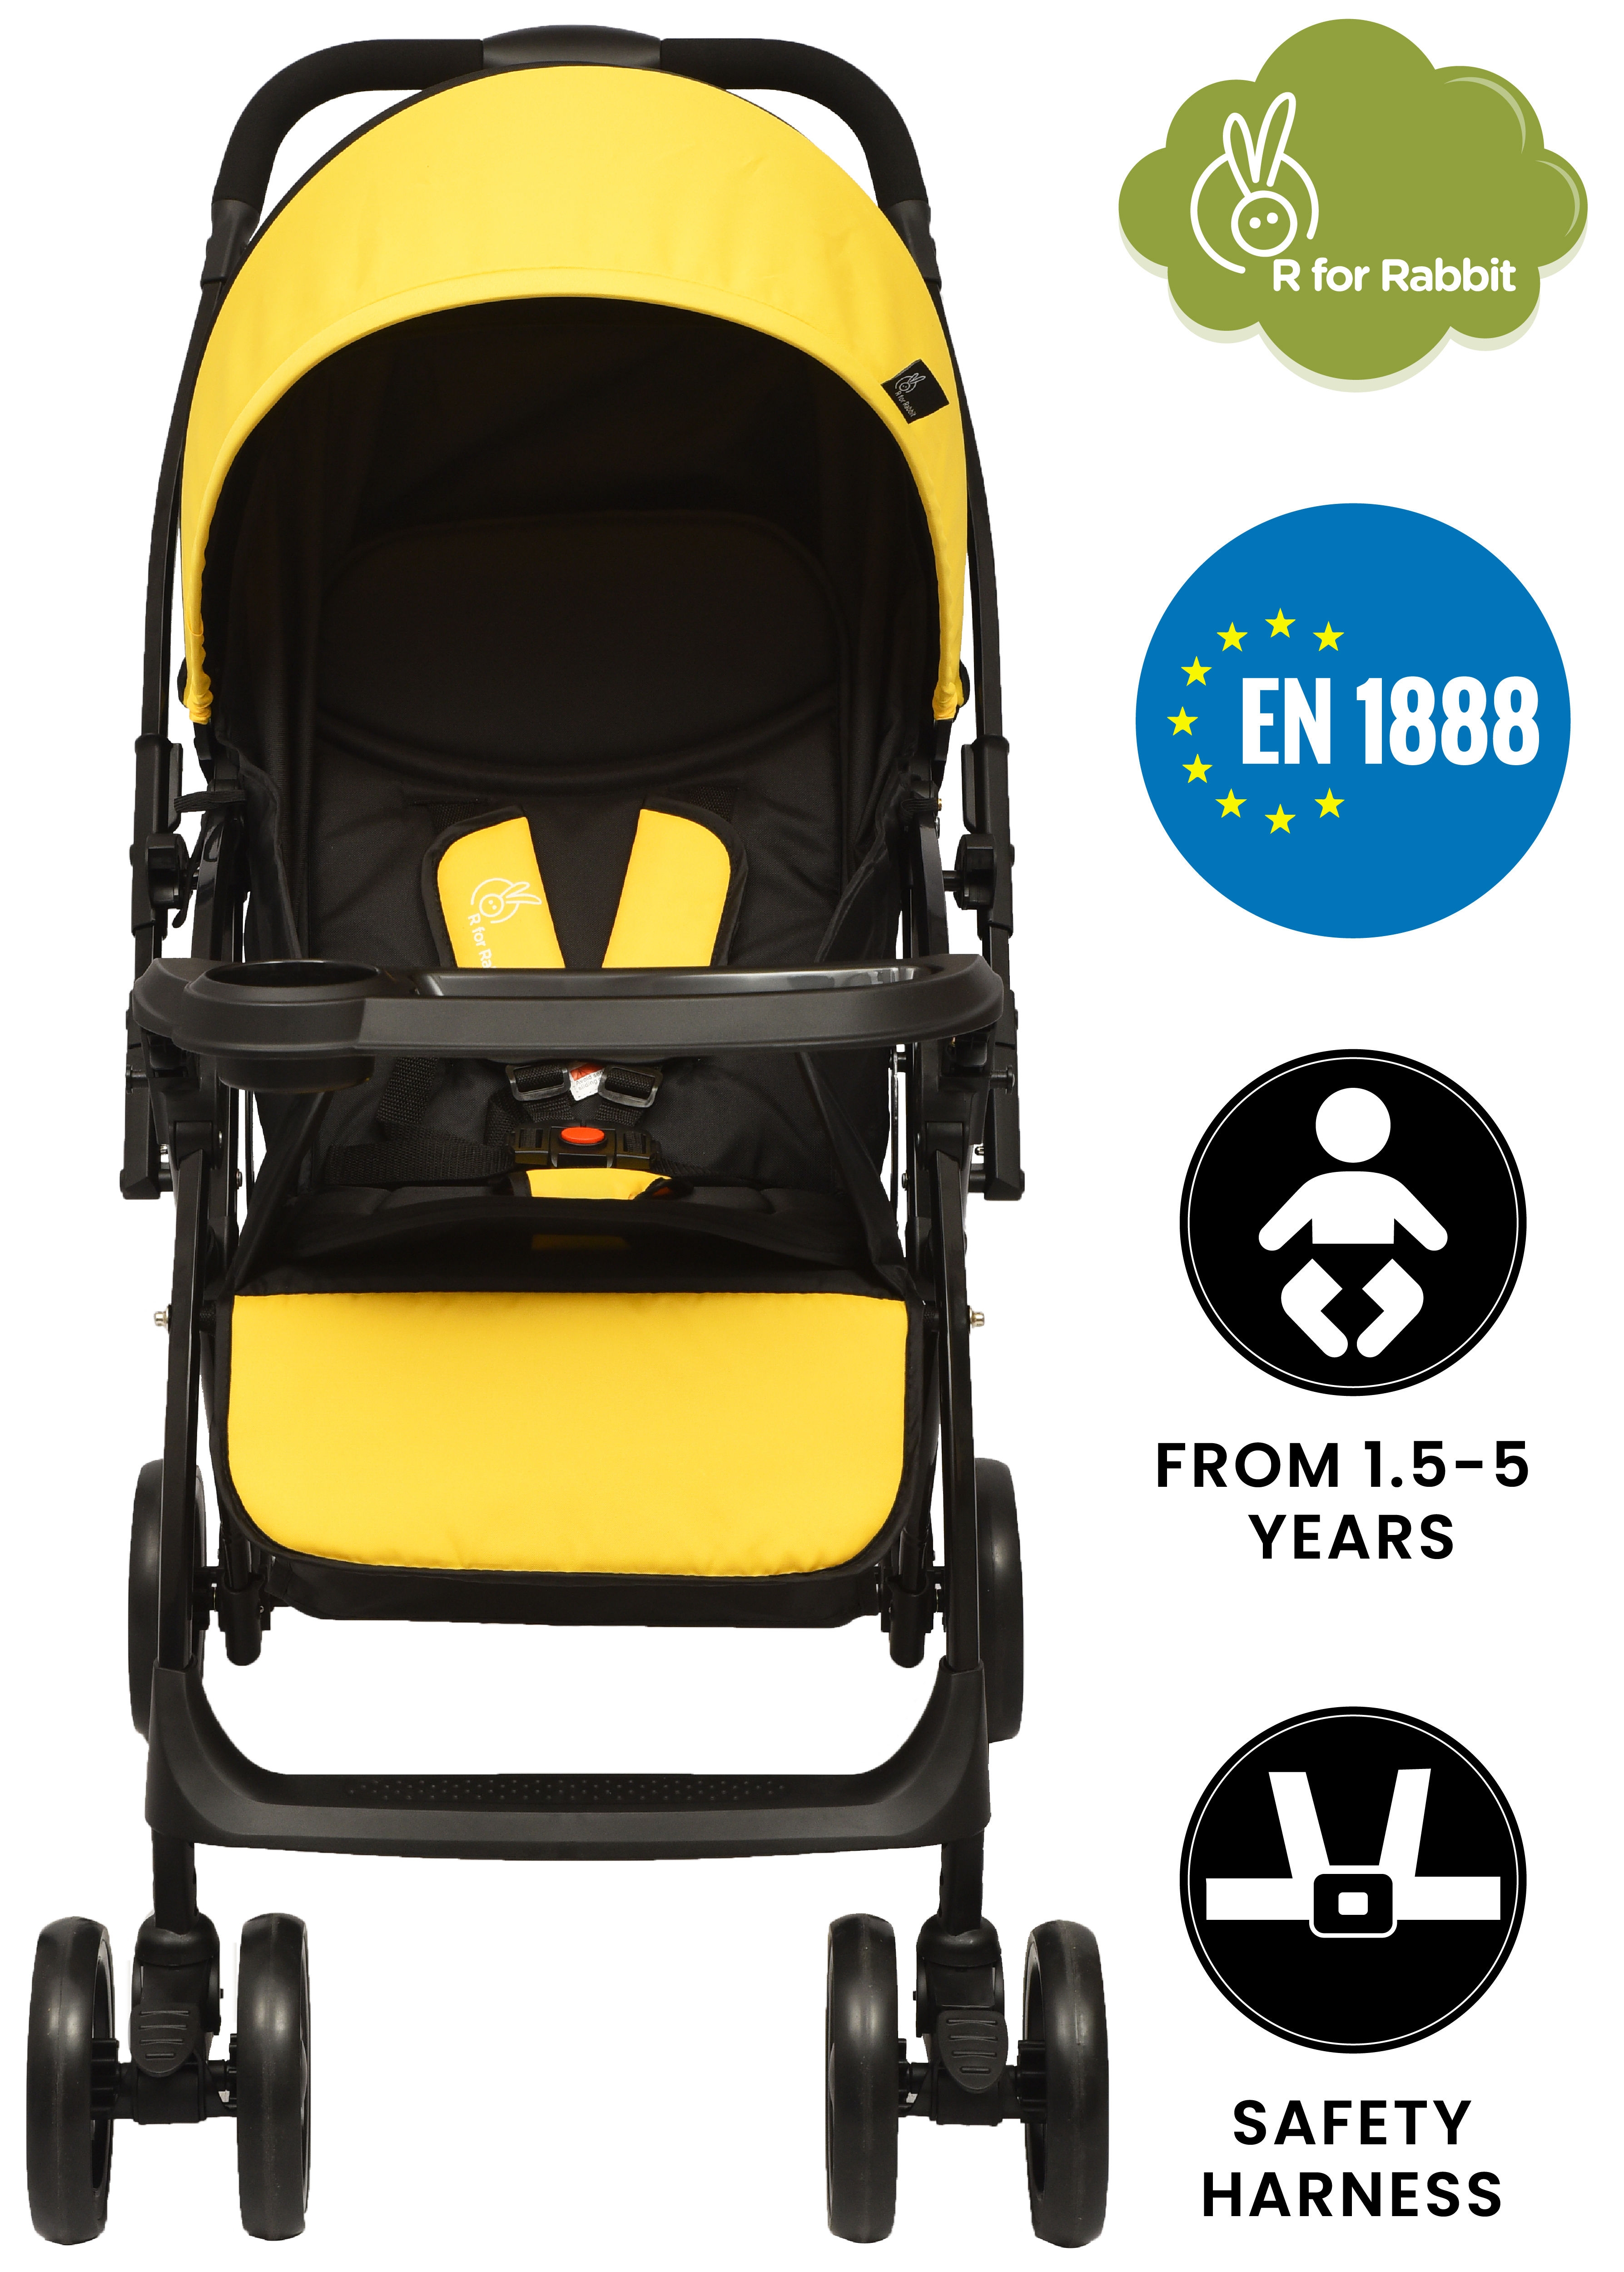 Mothercare | R for Rabbit Cuppy Cake Grand Stroller Black